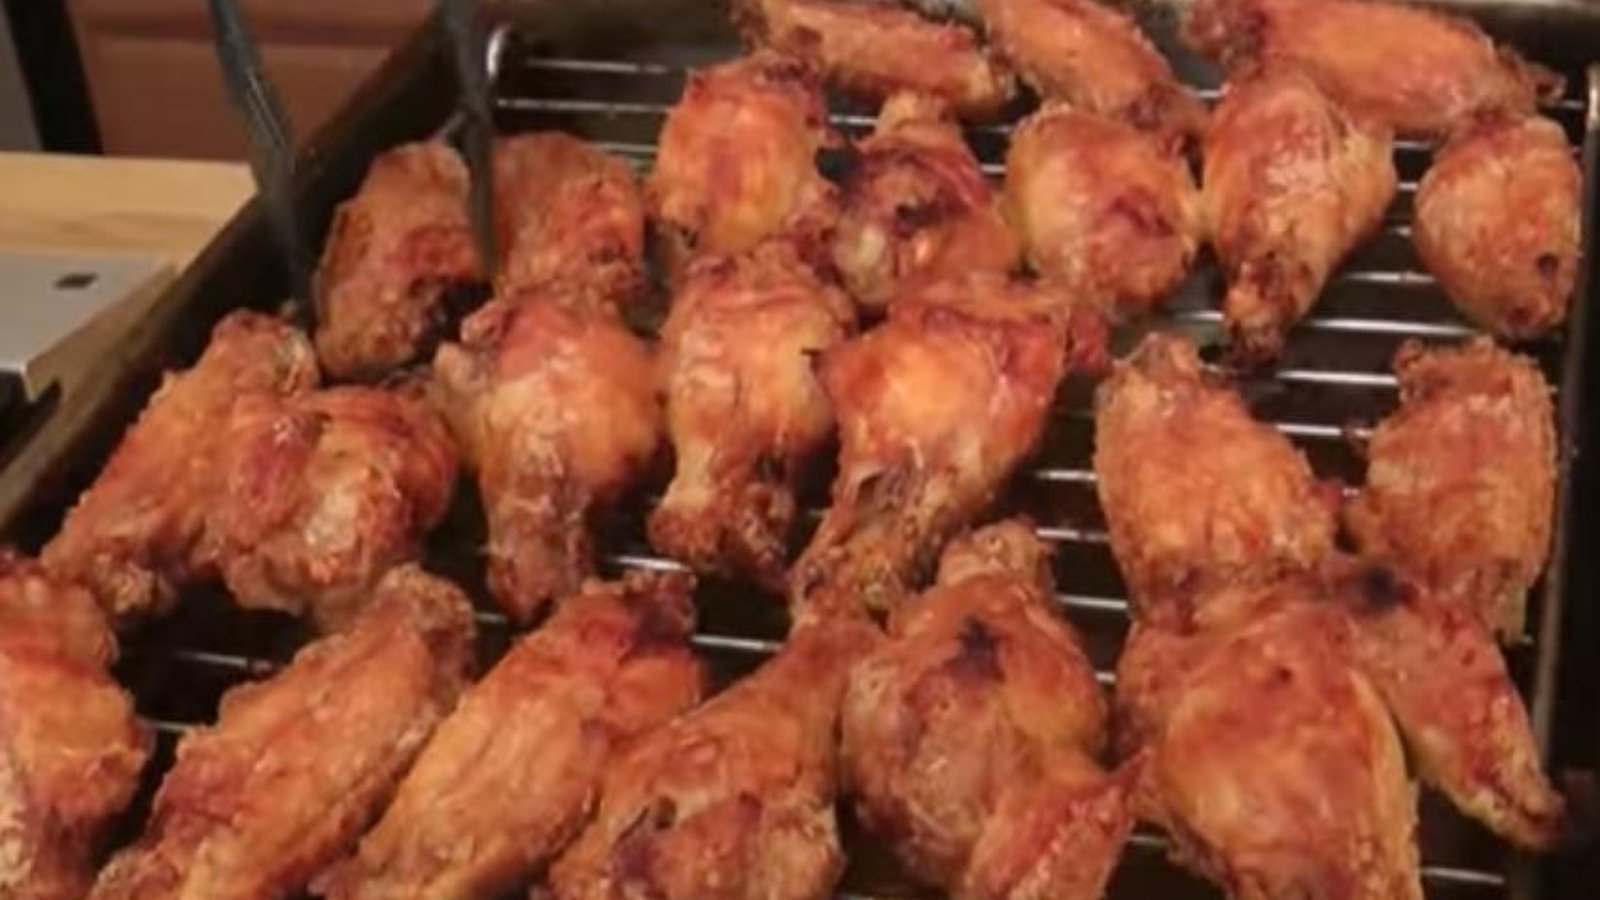 Extra crispy chicken wings without frying, we love it!